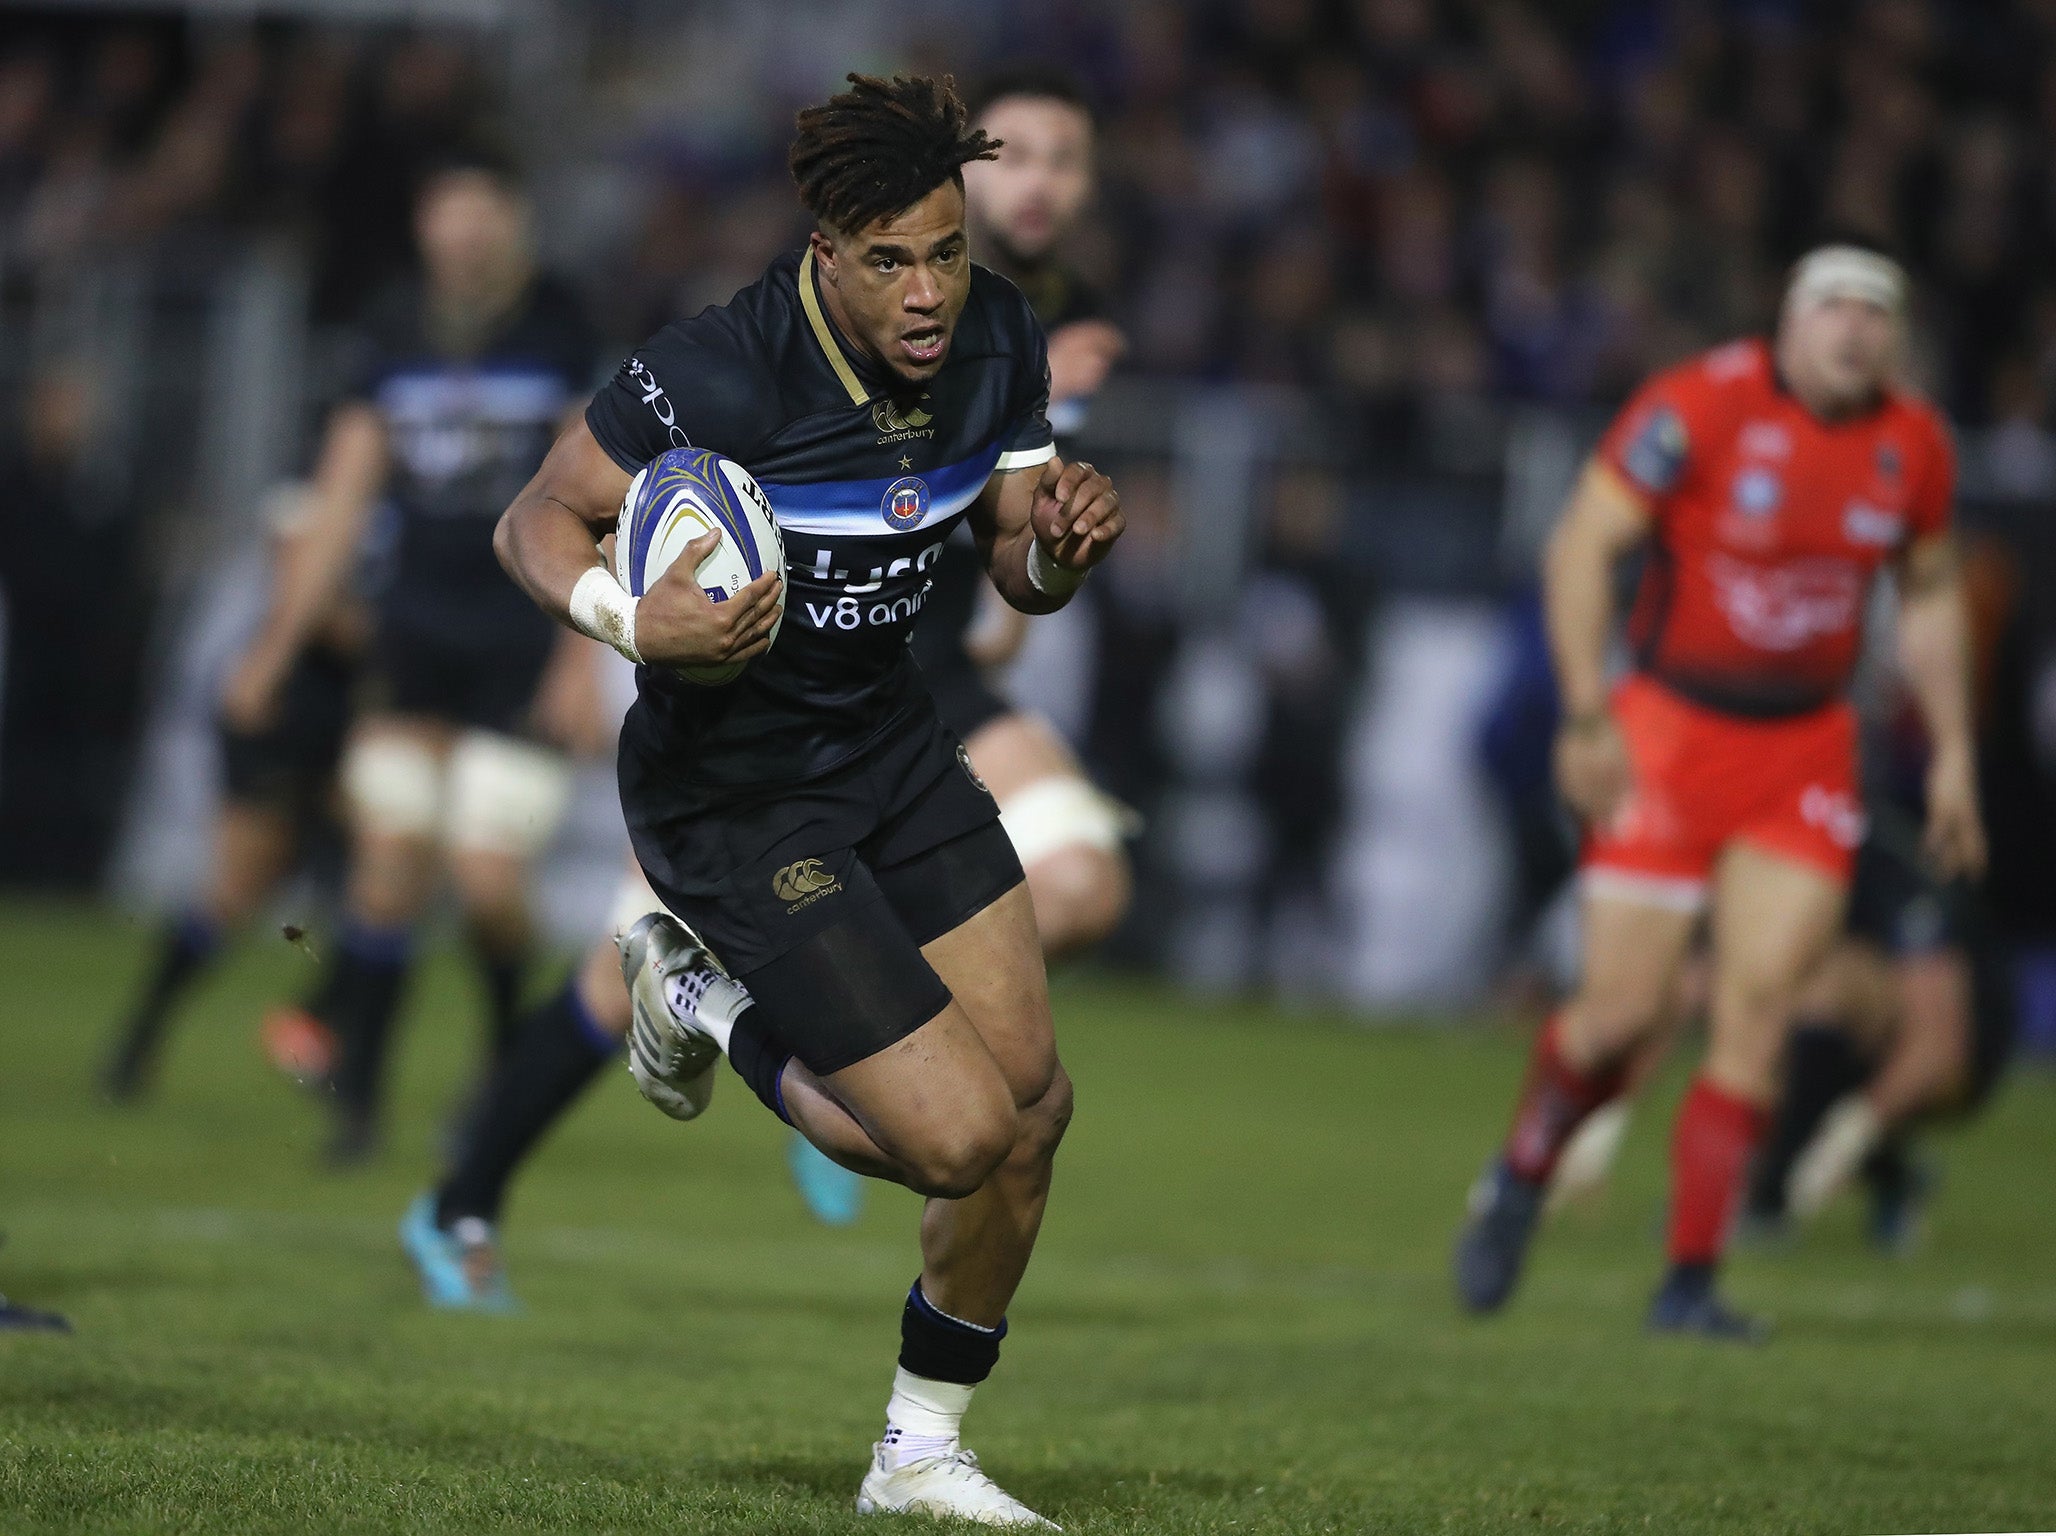 Anthony Watson scored two fine solo tries